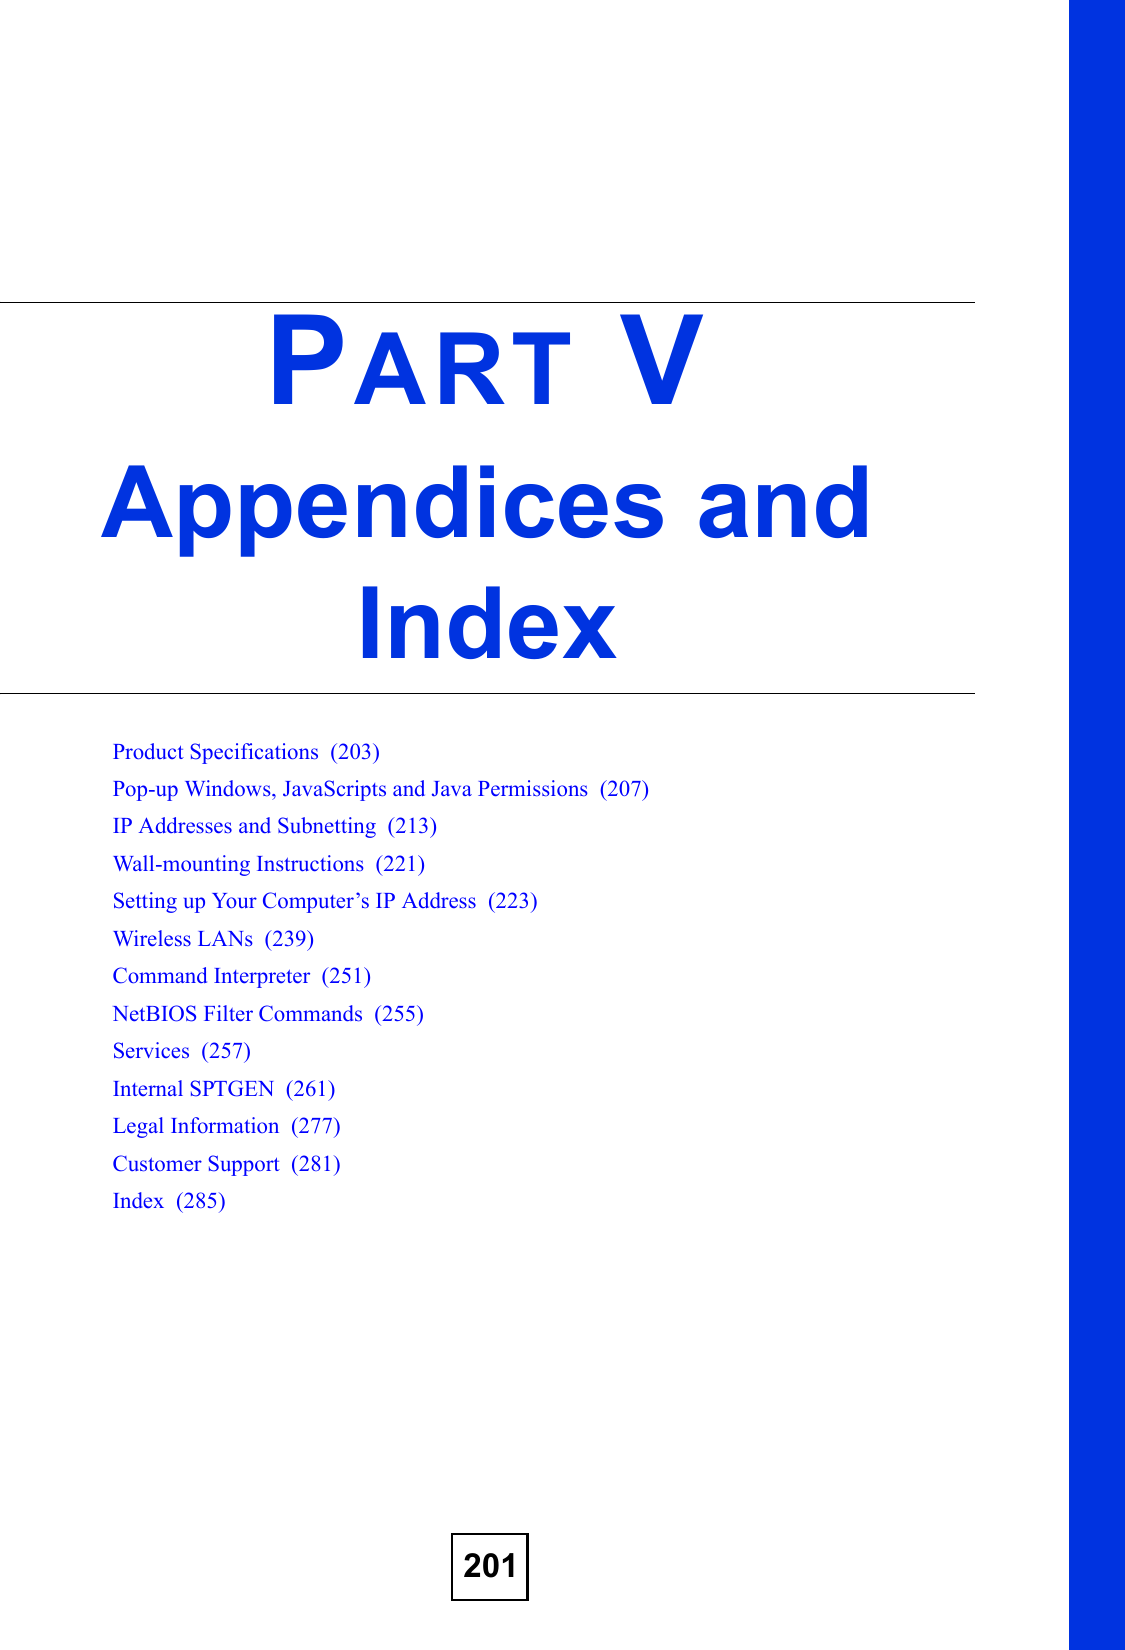 201PART VAppendices and IndexProduct Specifications  (203)Pop-up Windows, JavaScripts and Java Permissions  (207)IP Addresses and Subnetting  (213)Wall-mounting Instructions  (221)Setting up Your Computer’s IP Address  (223)Wireless LANs  (239)Command Interpreter  (251)NetBIOS Filter Commands  (255)Services  (257)Internal SPTGEN  (261)Legal Information  (277)Customer Support  (281)Index  (285)